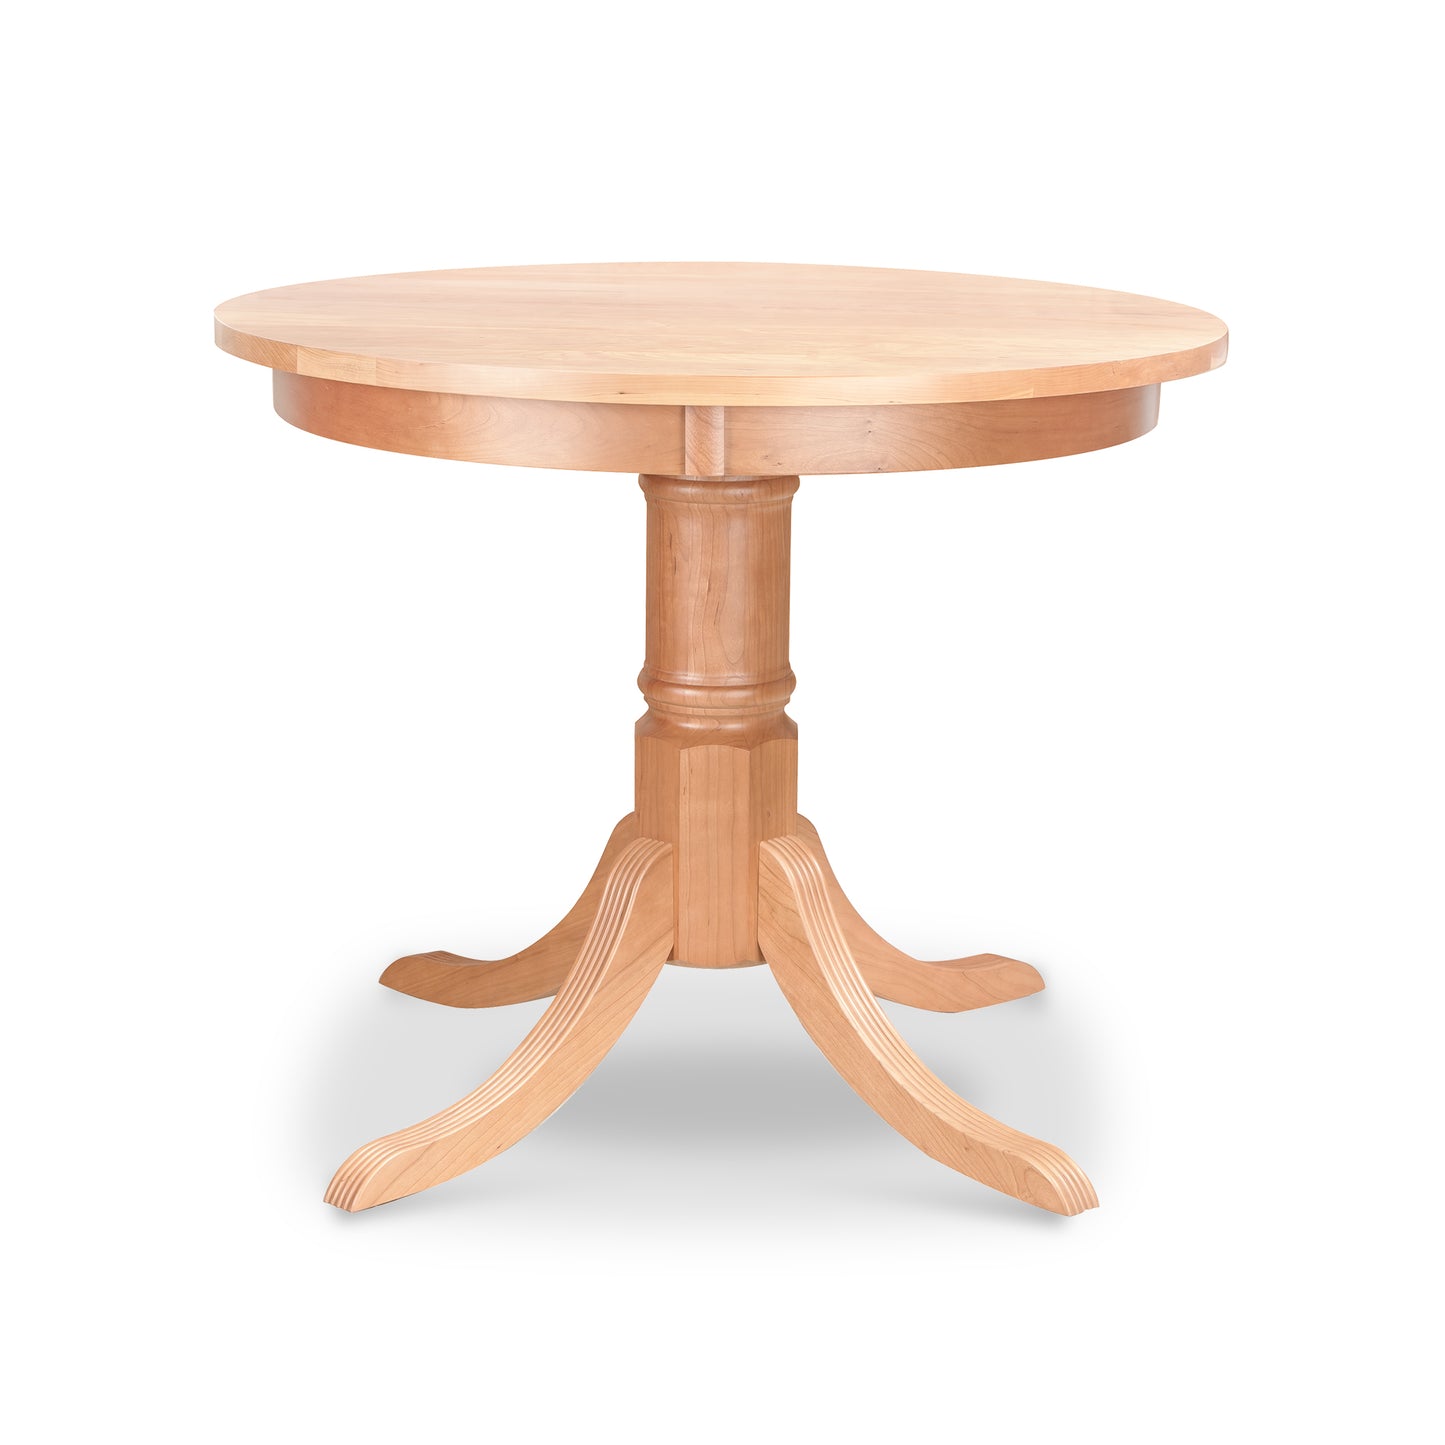 A Duncan-Phyfe Round Pedestal Dining Table with a Lyndon Furniture pedestal base.